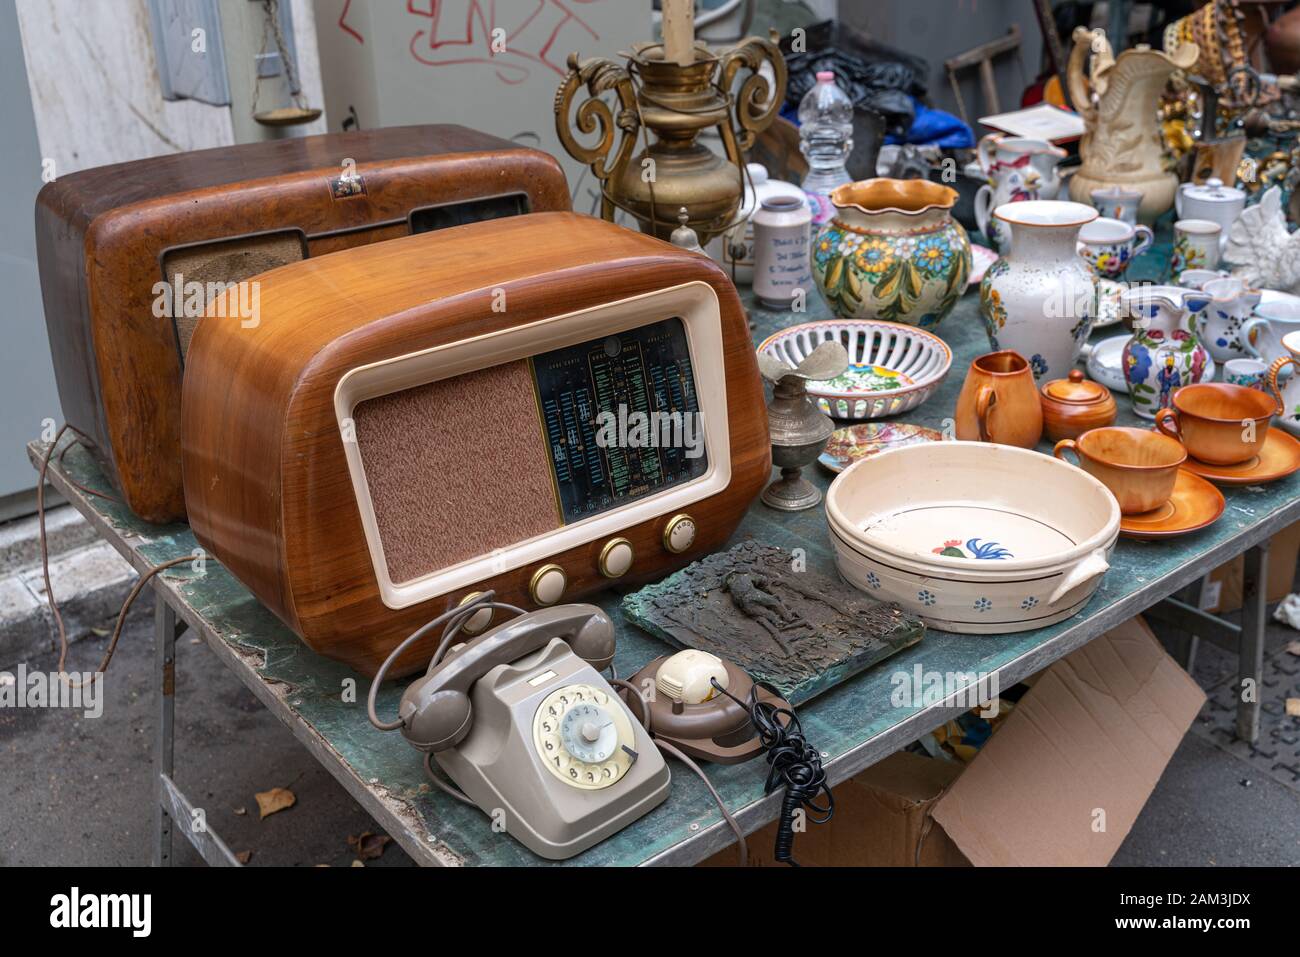 second hand items at the flea market Stock Photo